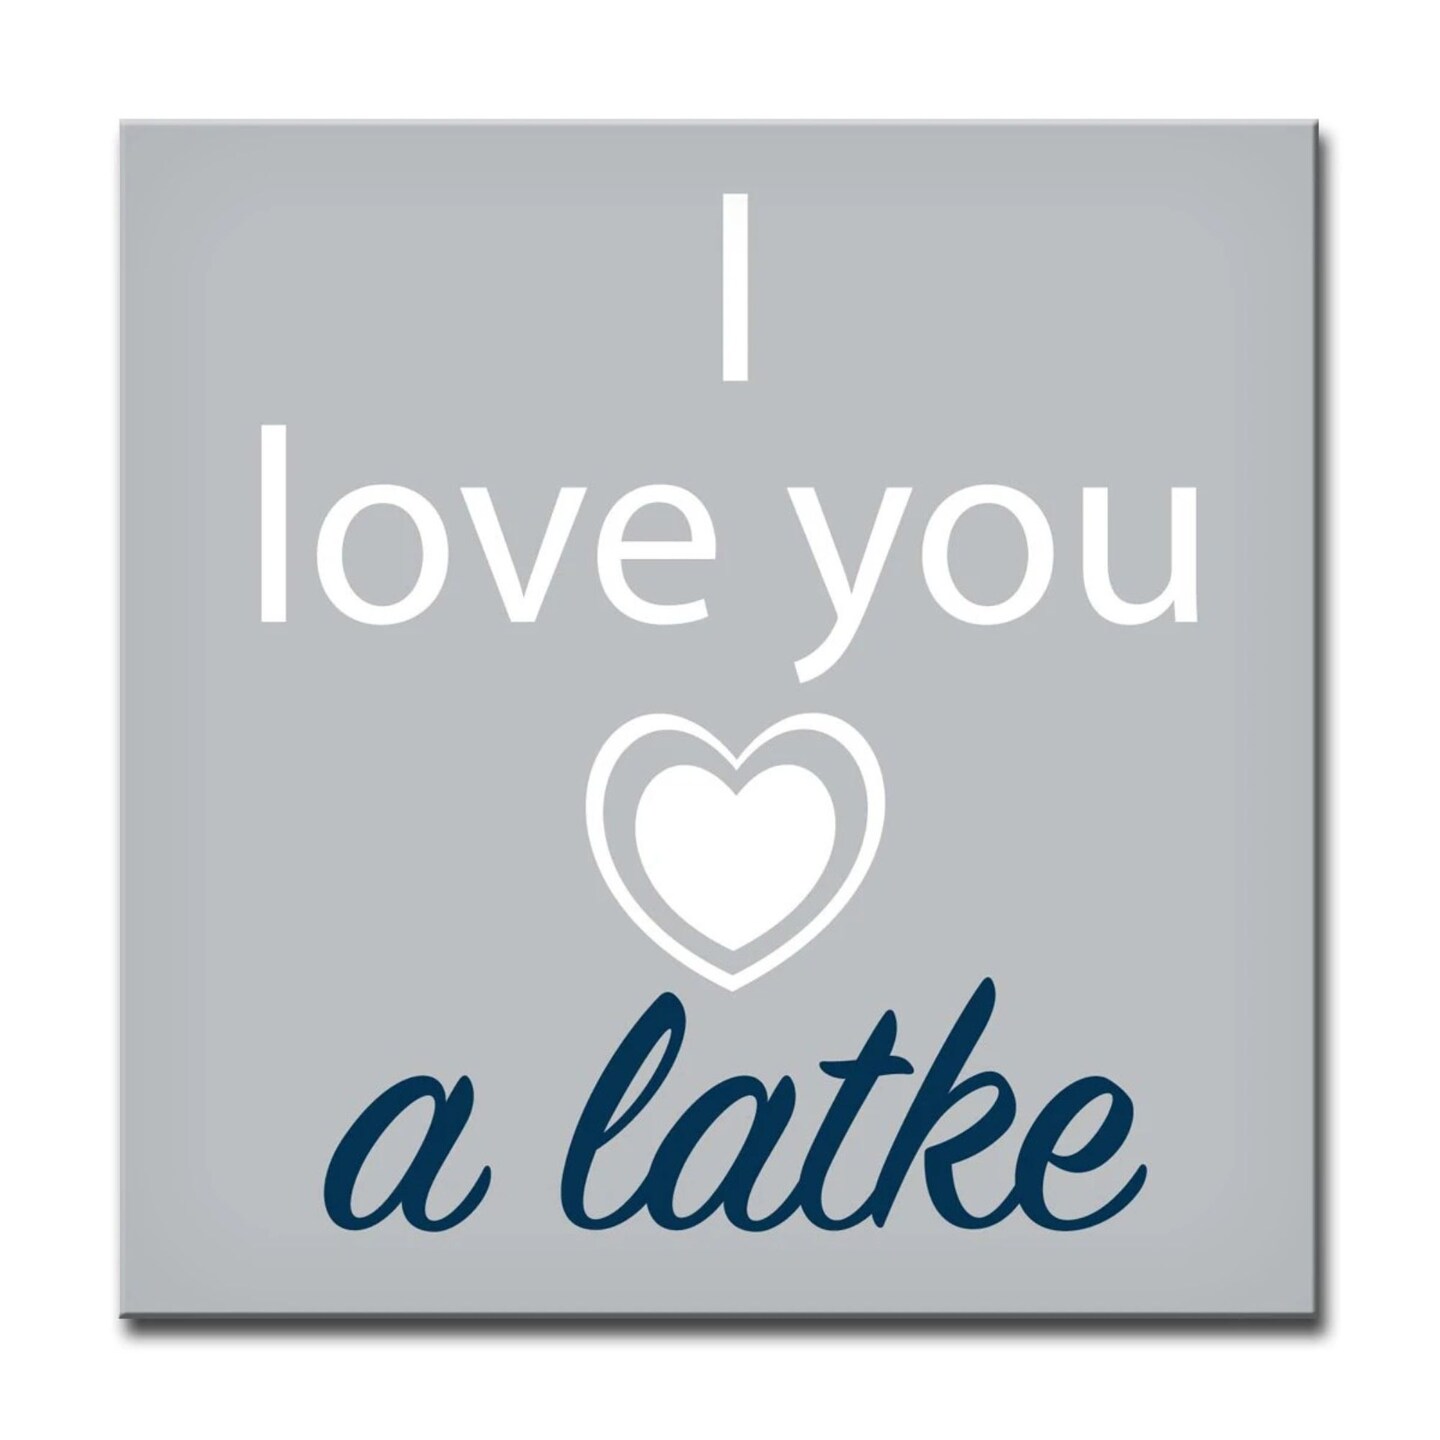 Crafted Creations Gray and Blue &#x22;I love you a latke&#x22; Hanukkah Square Cotton Wall Art Decor 20&#x22; x 20&#x22;